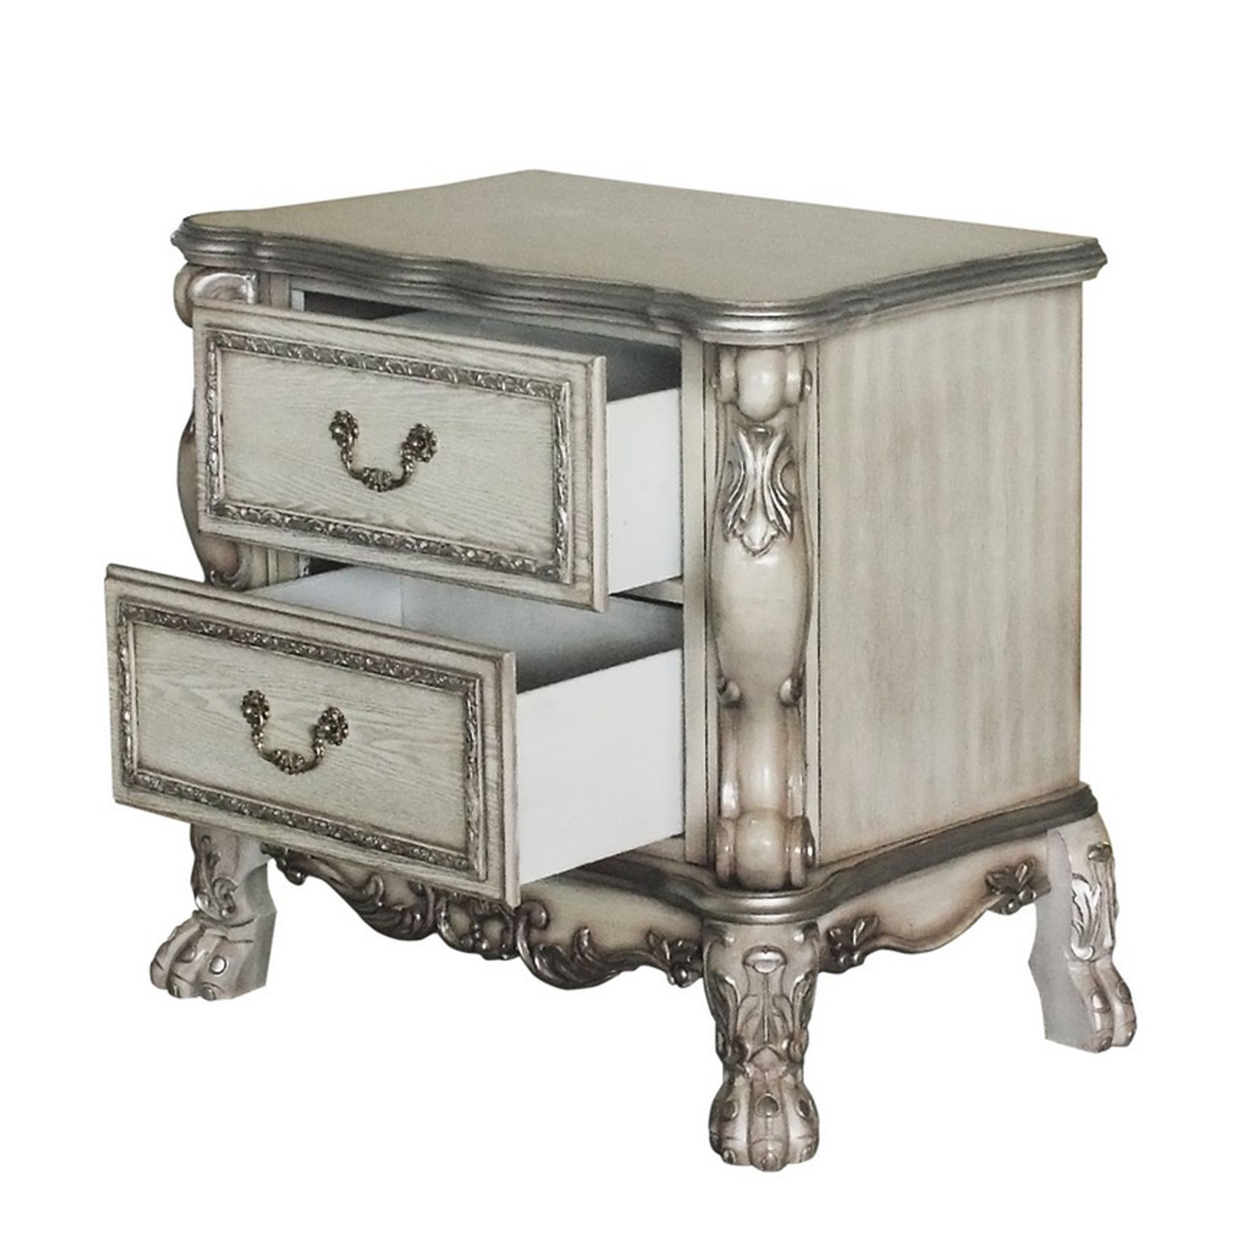 Traditional Wooden Nightstand With 2 Drawers And Carved Details, Silver- Saltoro Sherpi